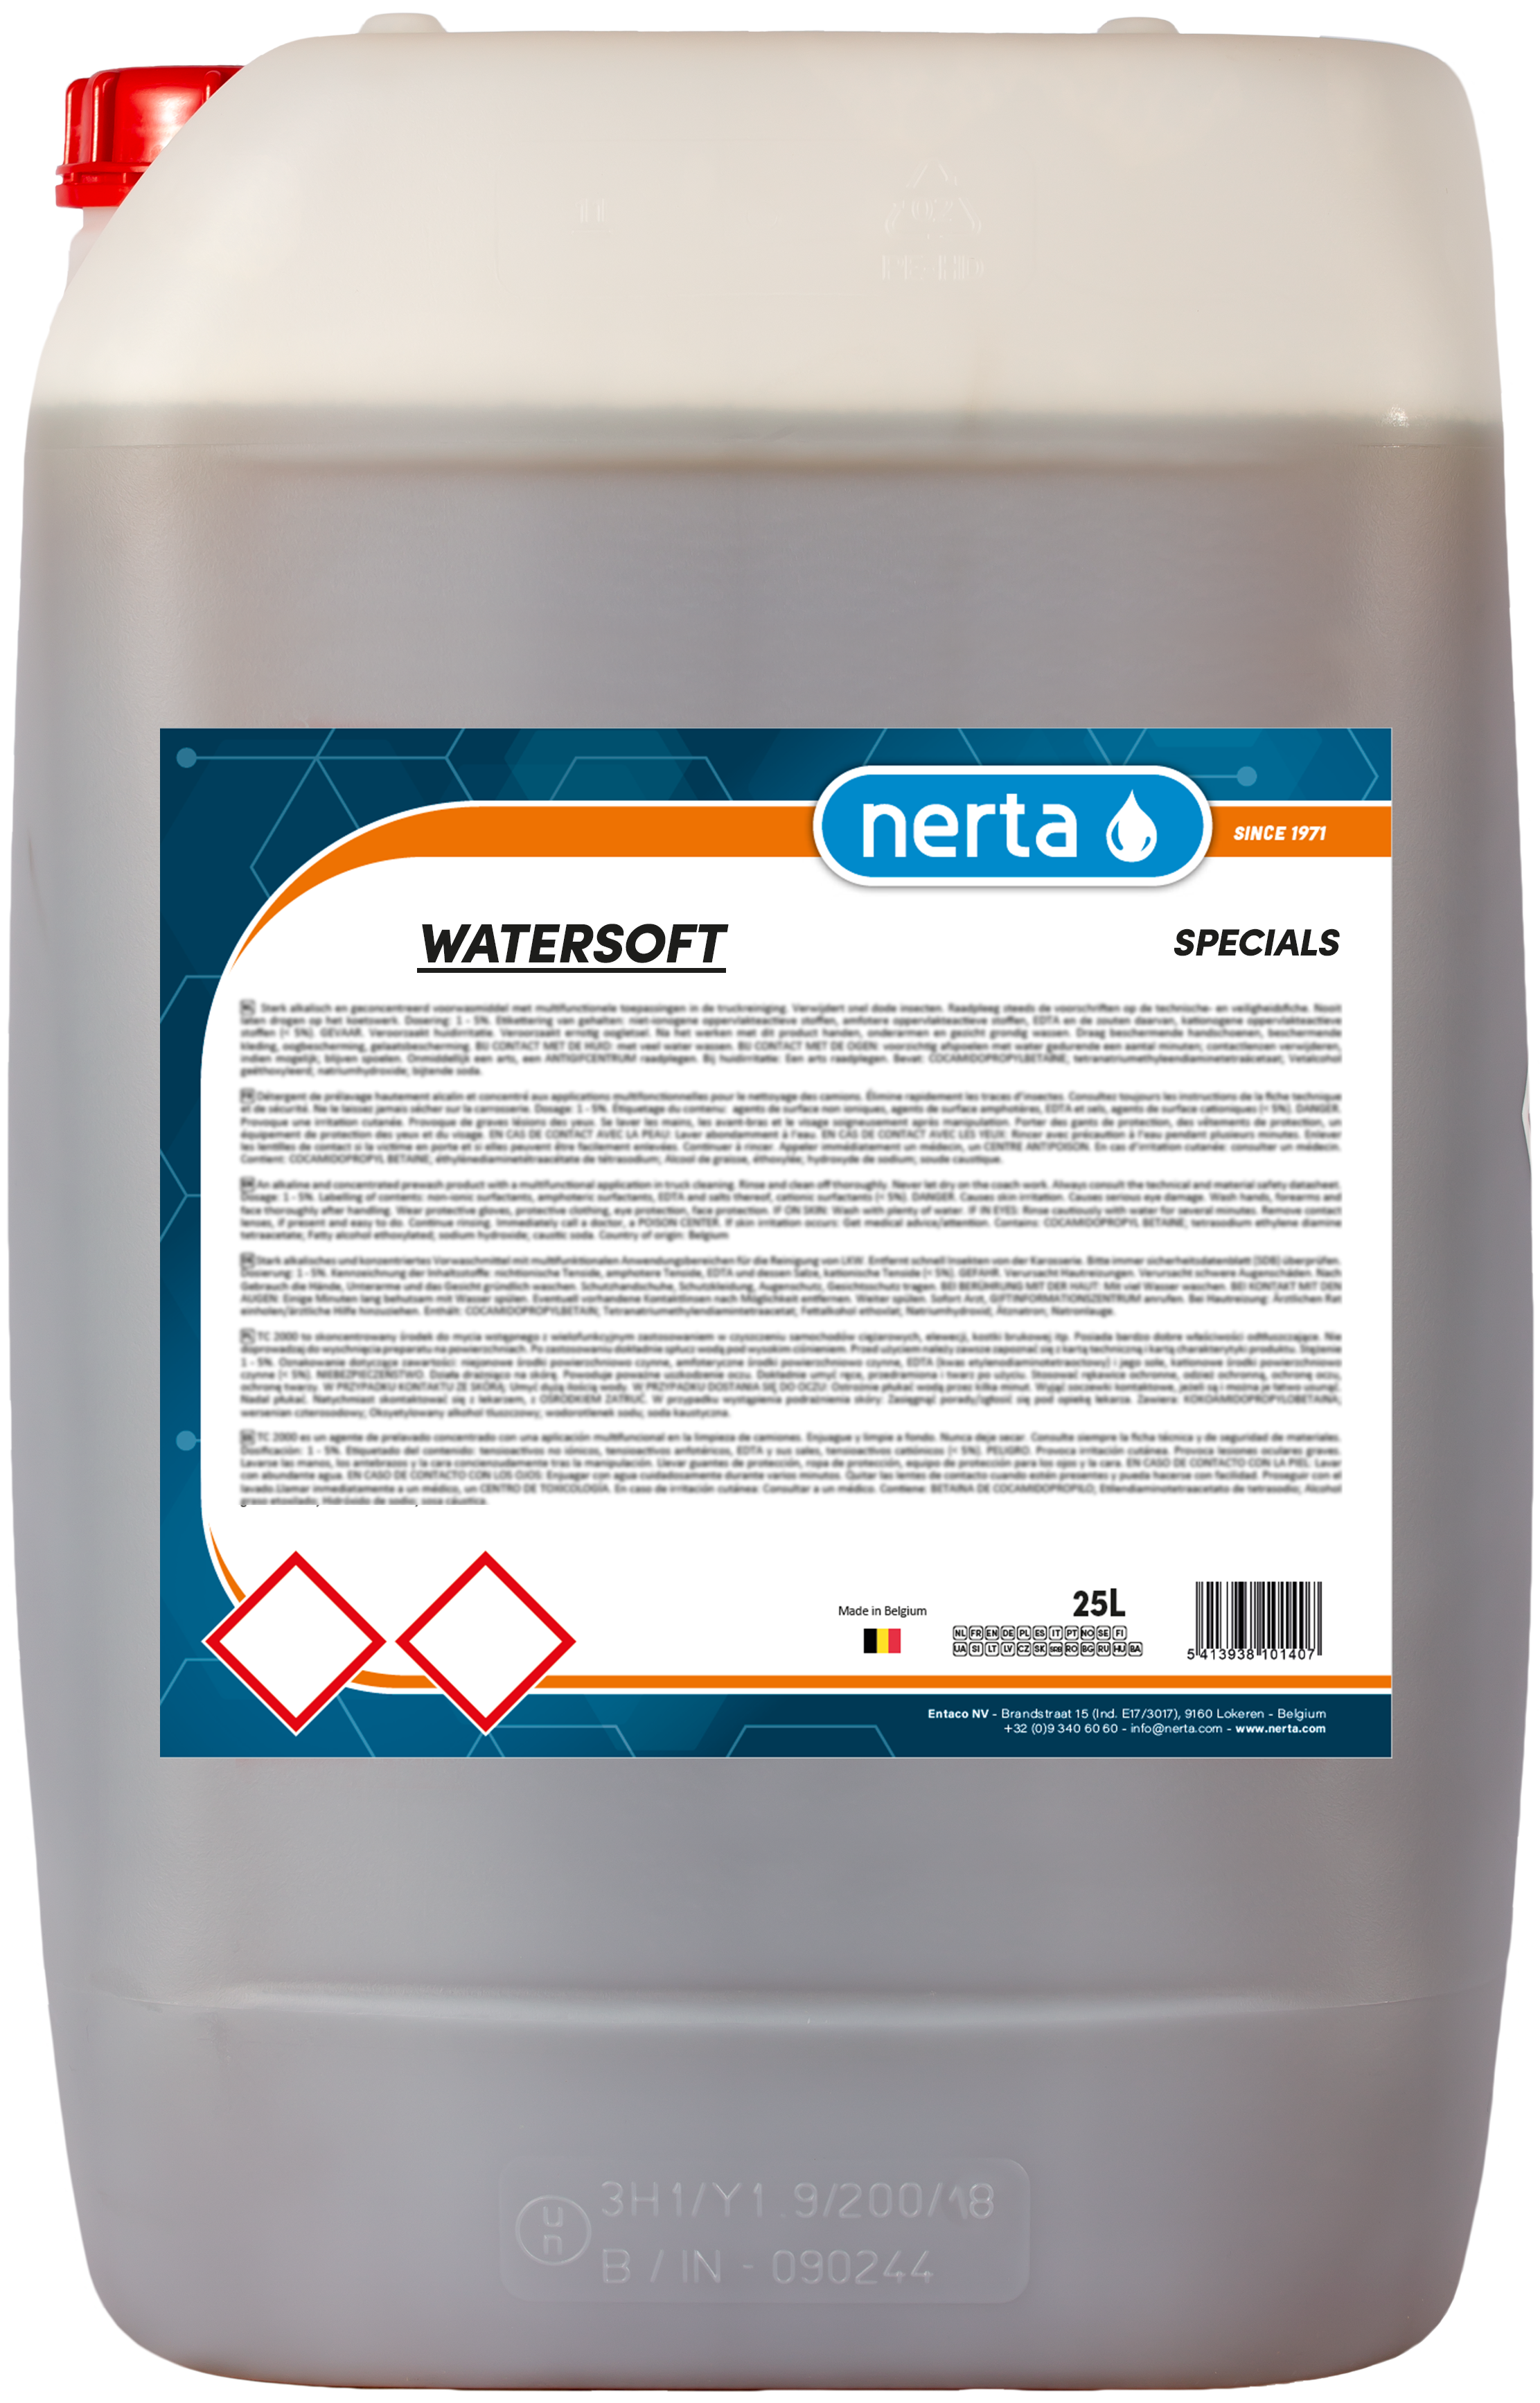 WATERSOFT - Nerta Professional cleaning products